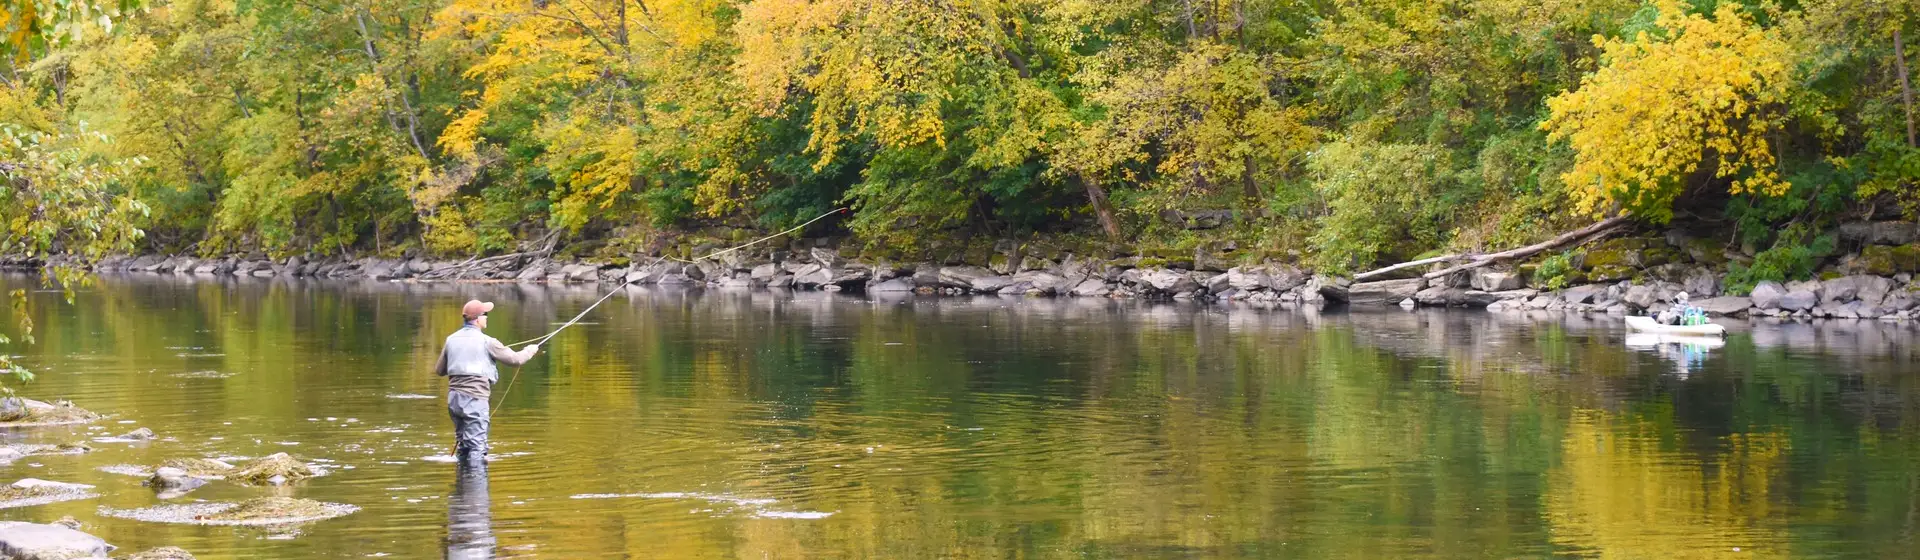 6 Must-Dos in the Juniata River Valley in the Fall